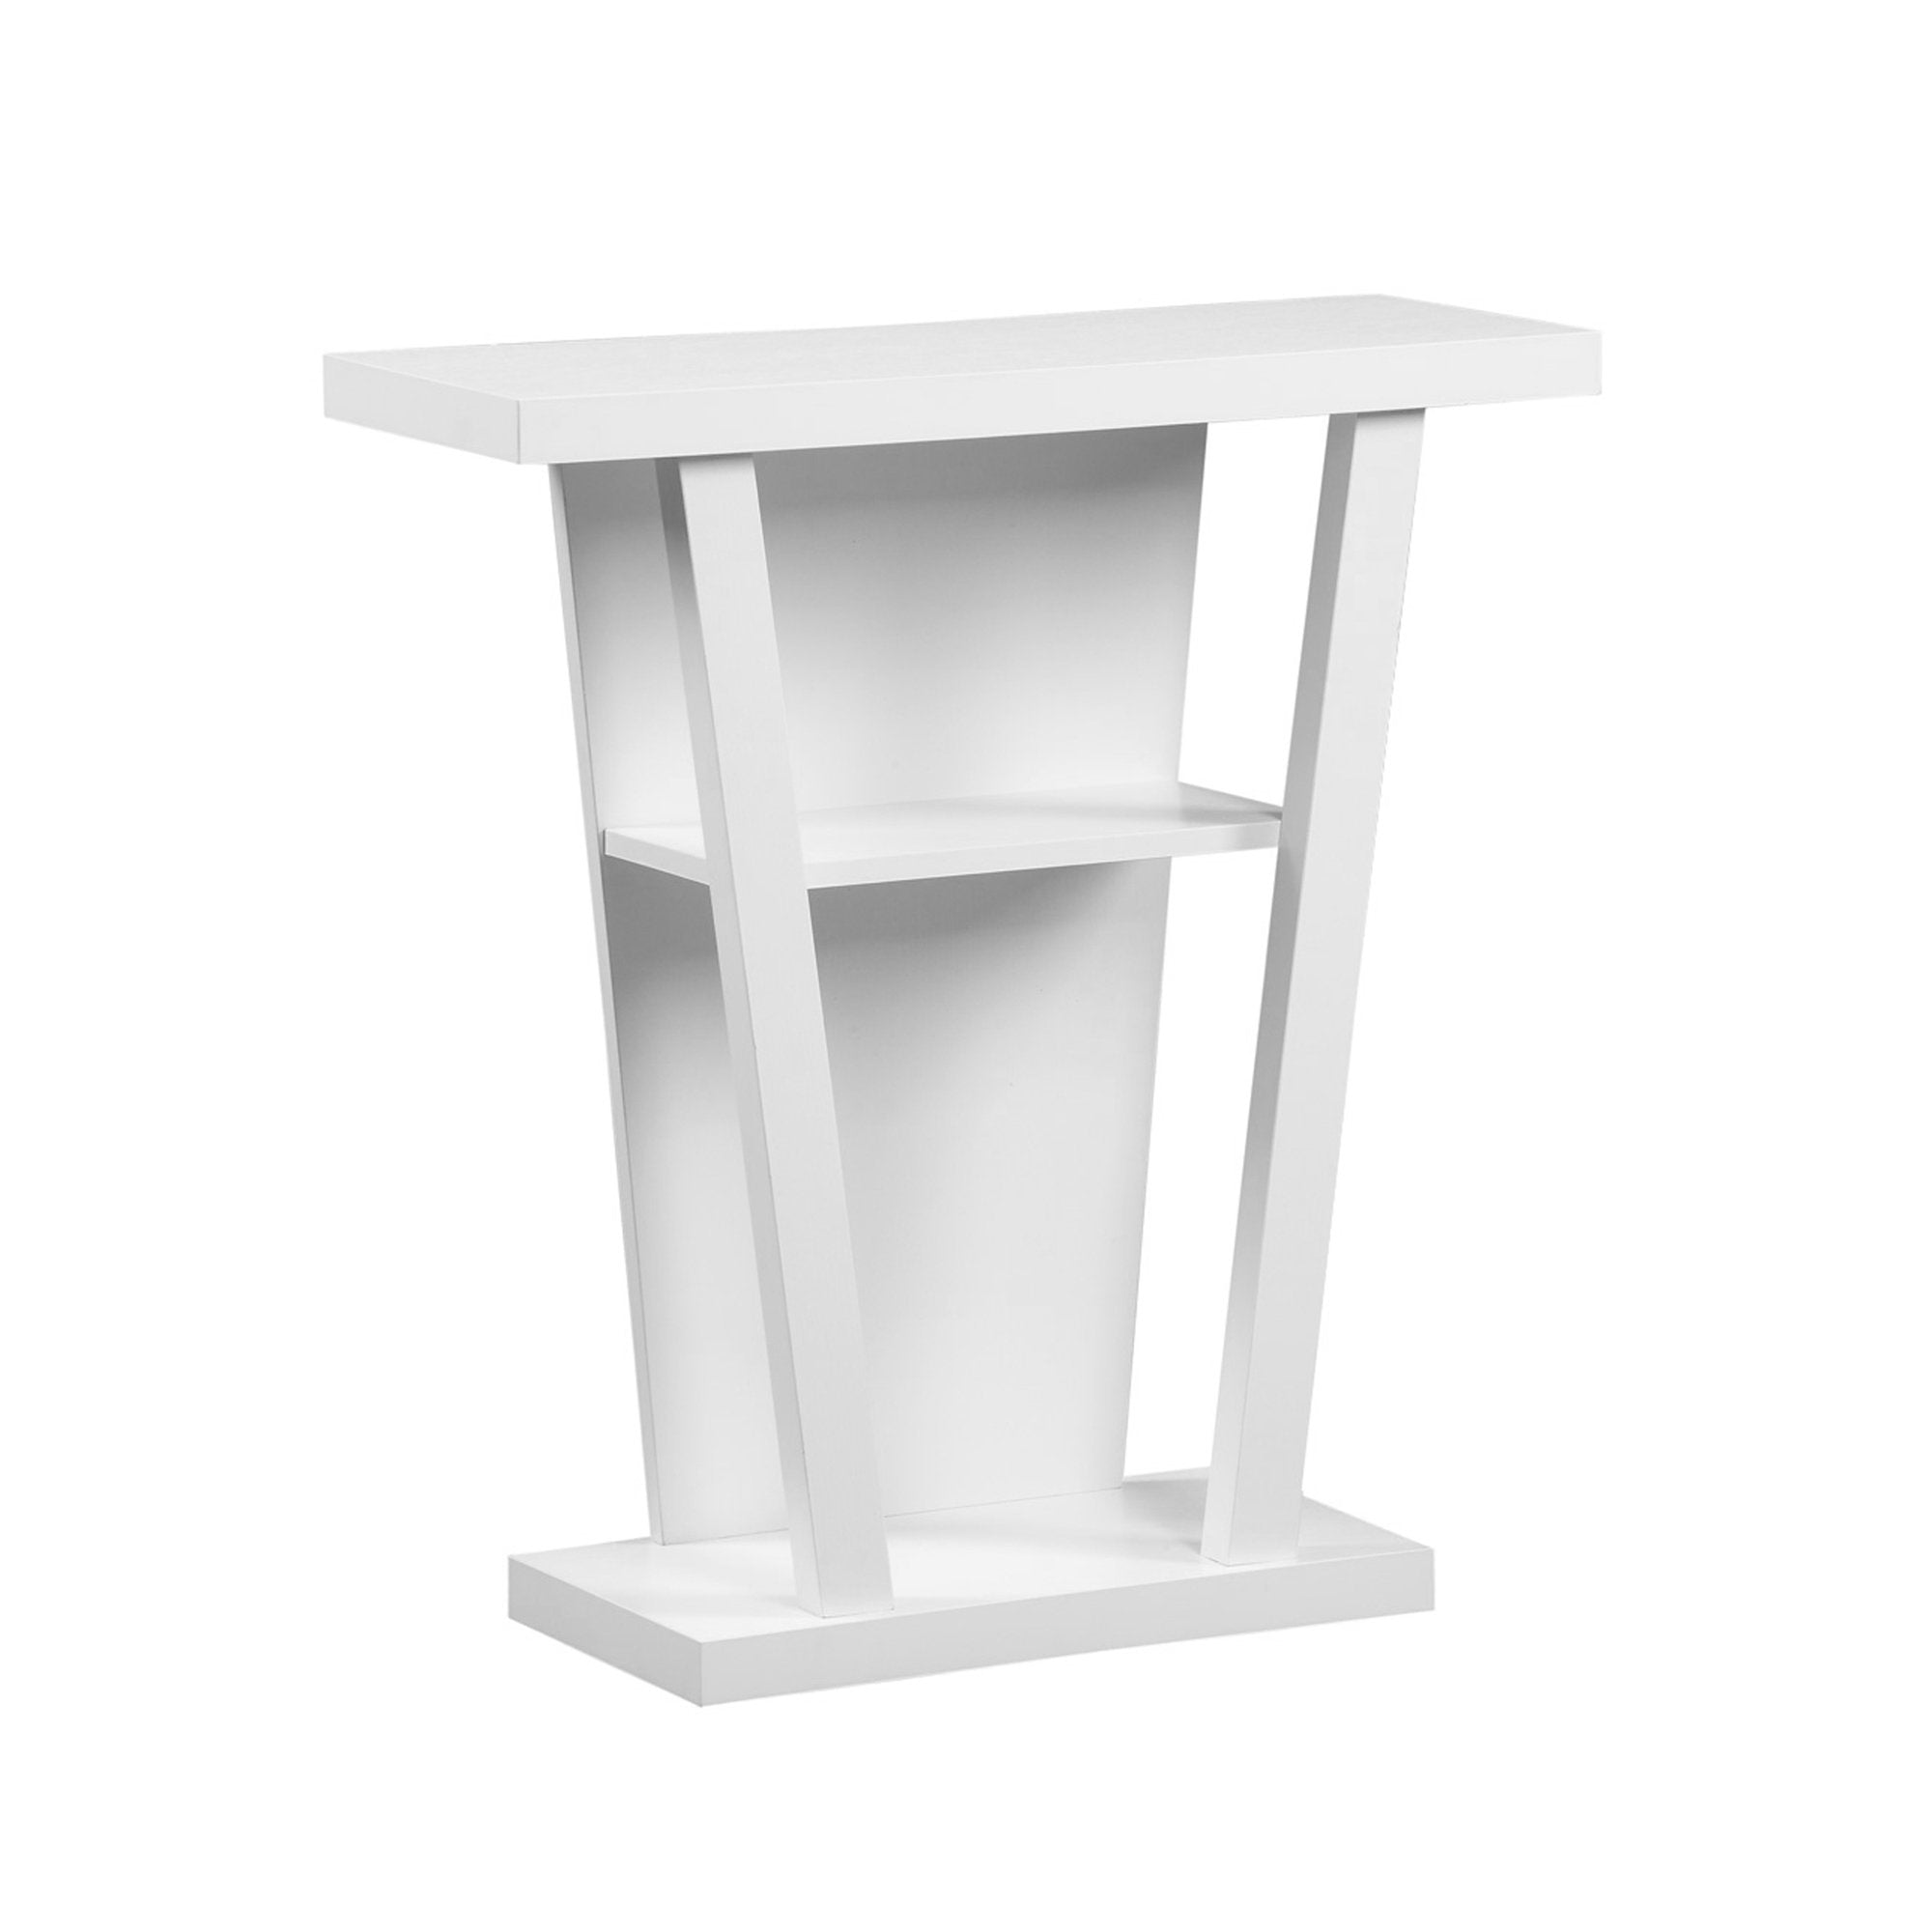 11.5" x 31.5" x 33.75" White Finish Hollow Core Accent Table